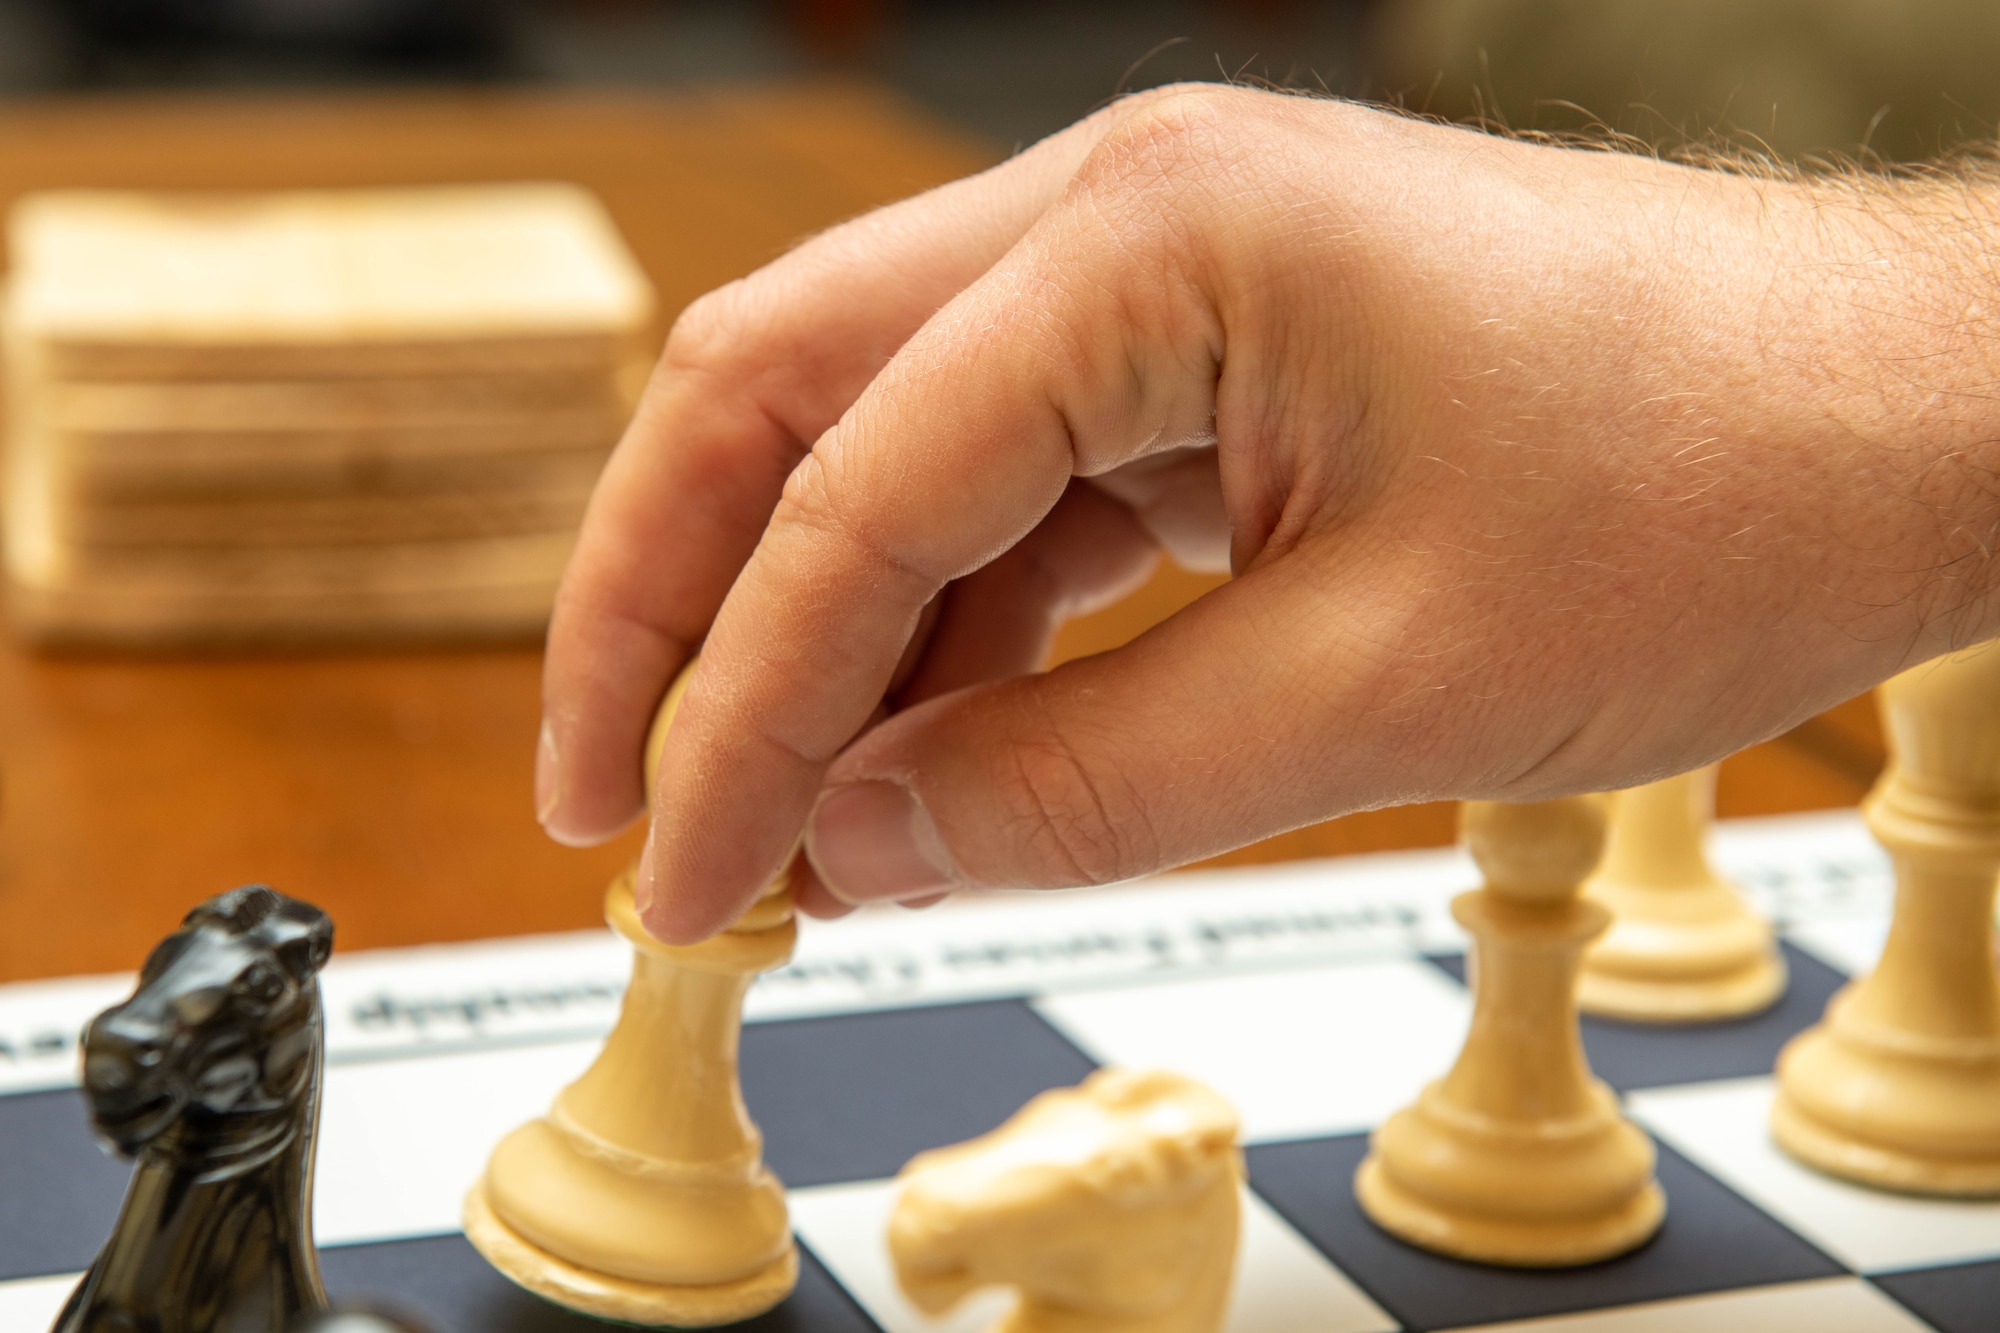 Airman 1st Class Charles Unruh, 28th Logistics Readiness Squadron distribution section chief, places a chess piece on a chess board at Ellsworth Air Force Base, S.D., Oct. 20, 2021. Unruh won four awards at the 62nd Annual U.S. Armed Forces Open Chess Championship as well as a commemorative chess board for the event. (U.S. Air Force photo by Airman 1st Class Quentin K. Marx)